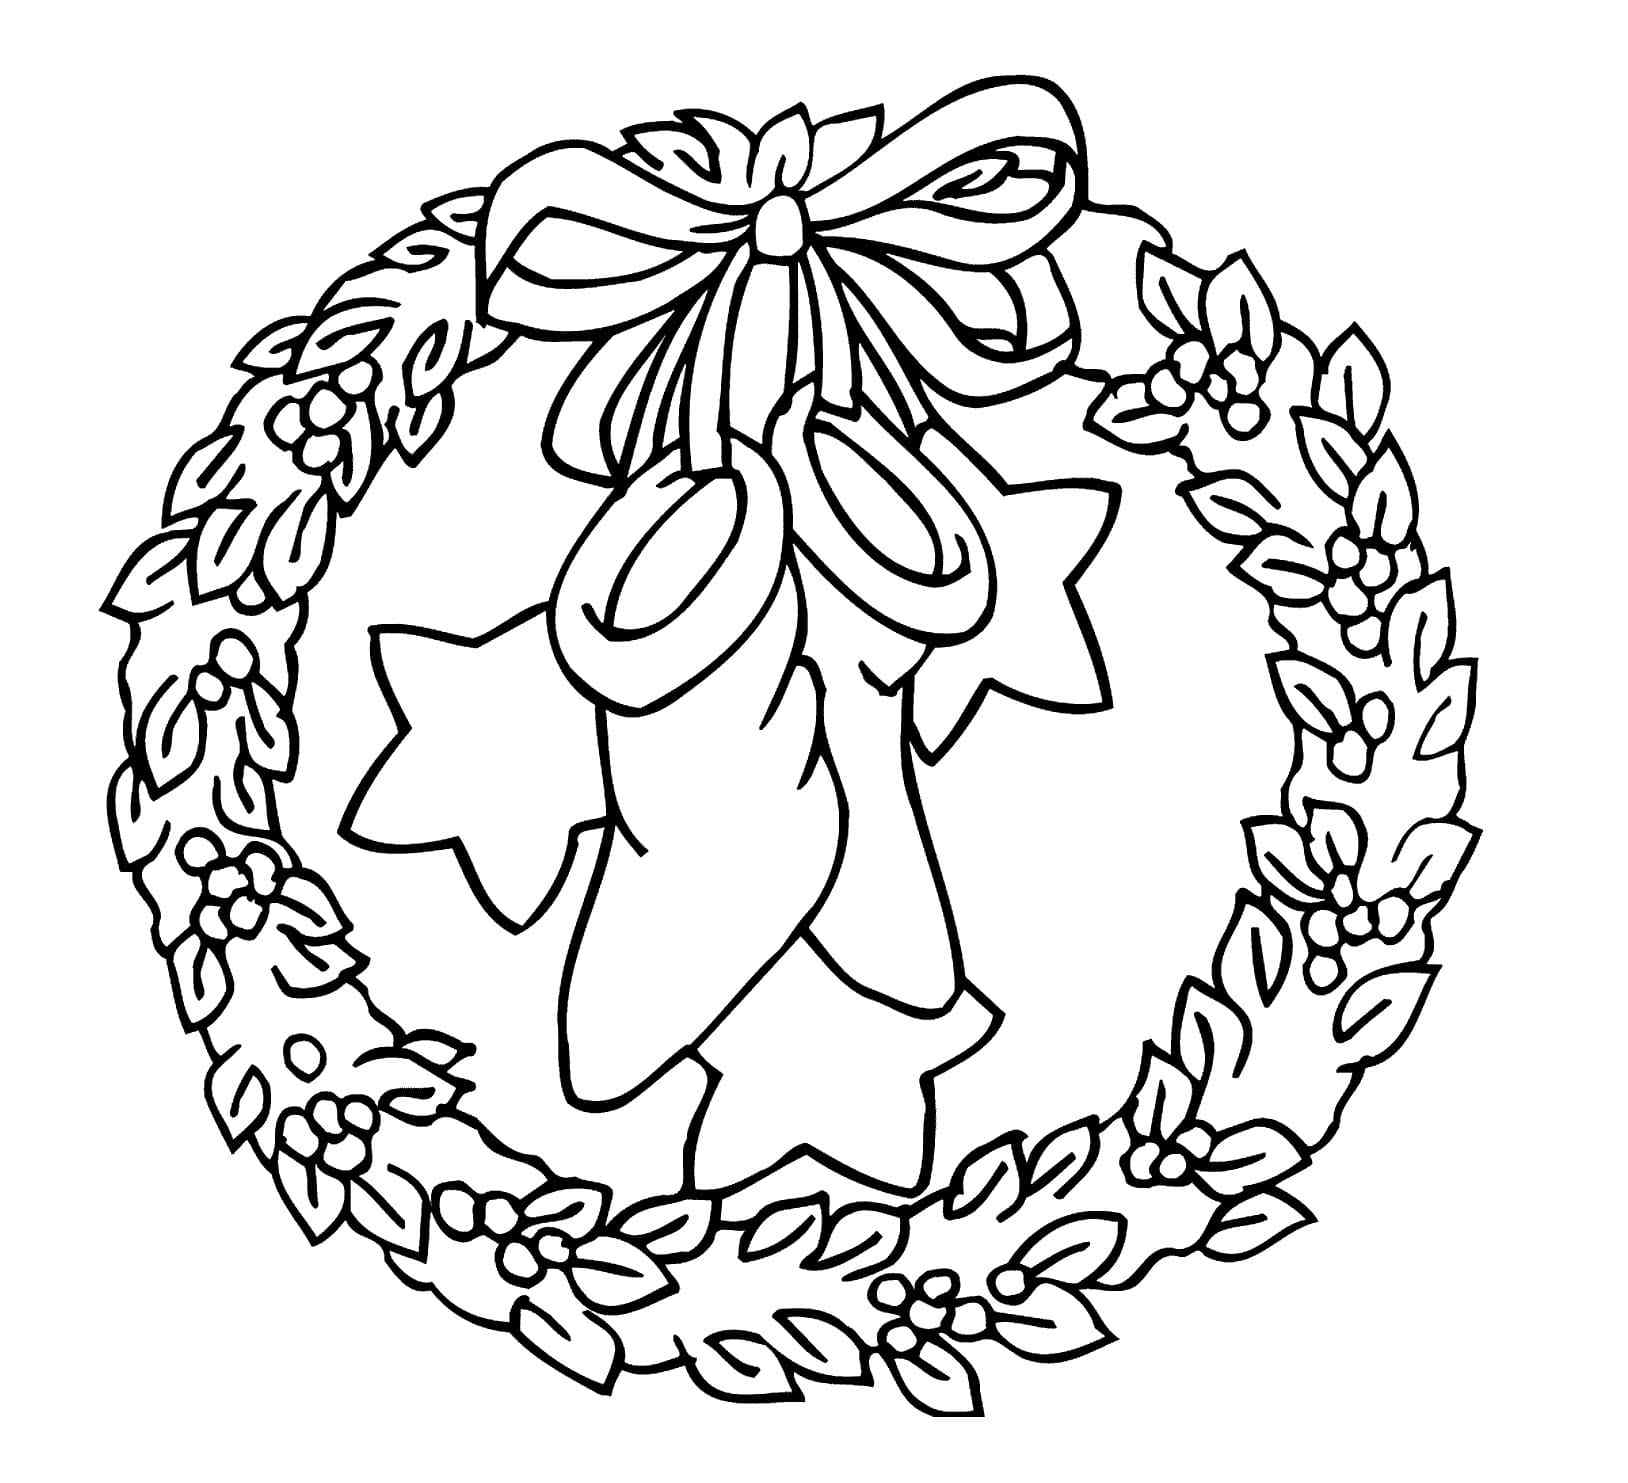 The Christmas Wreath Coloring Page